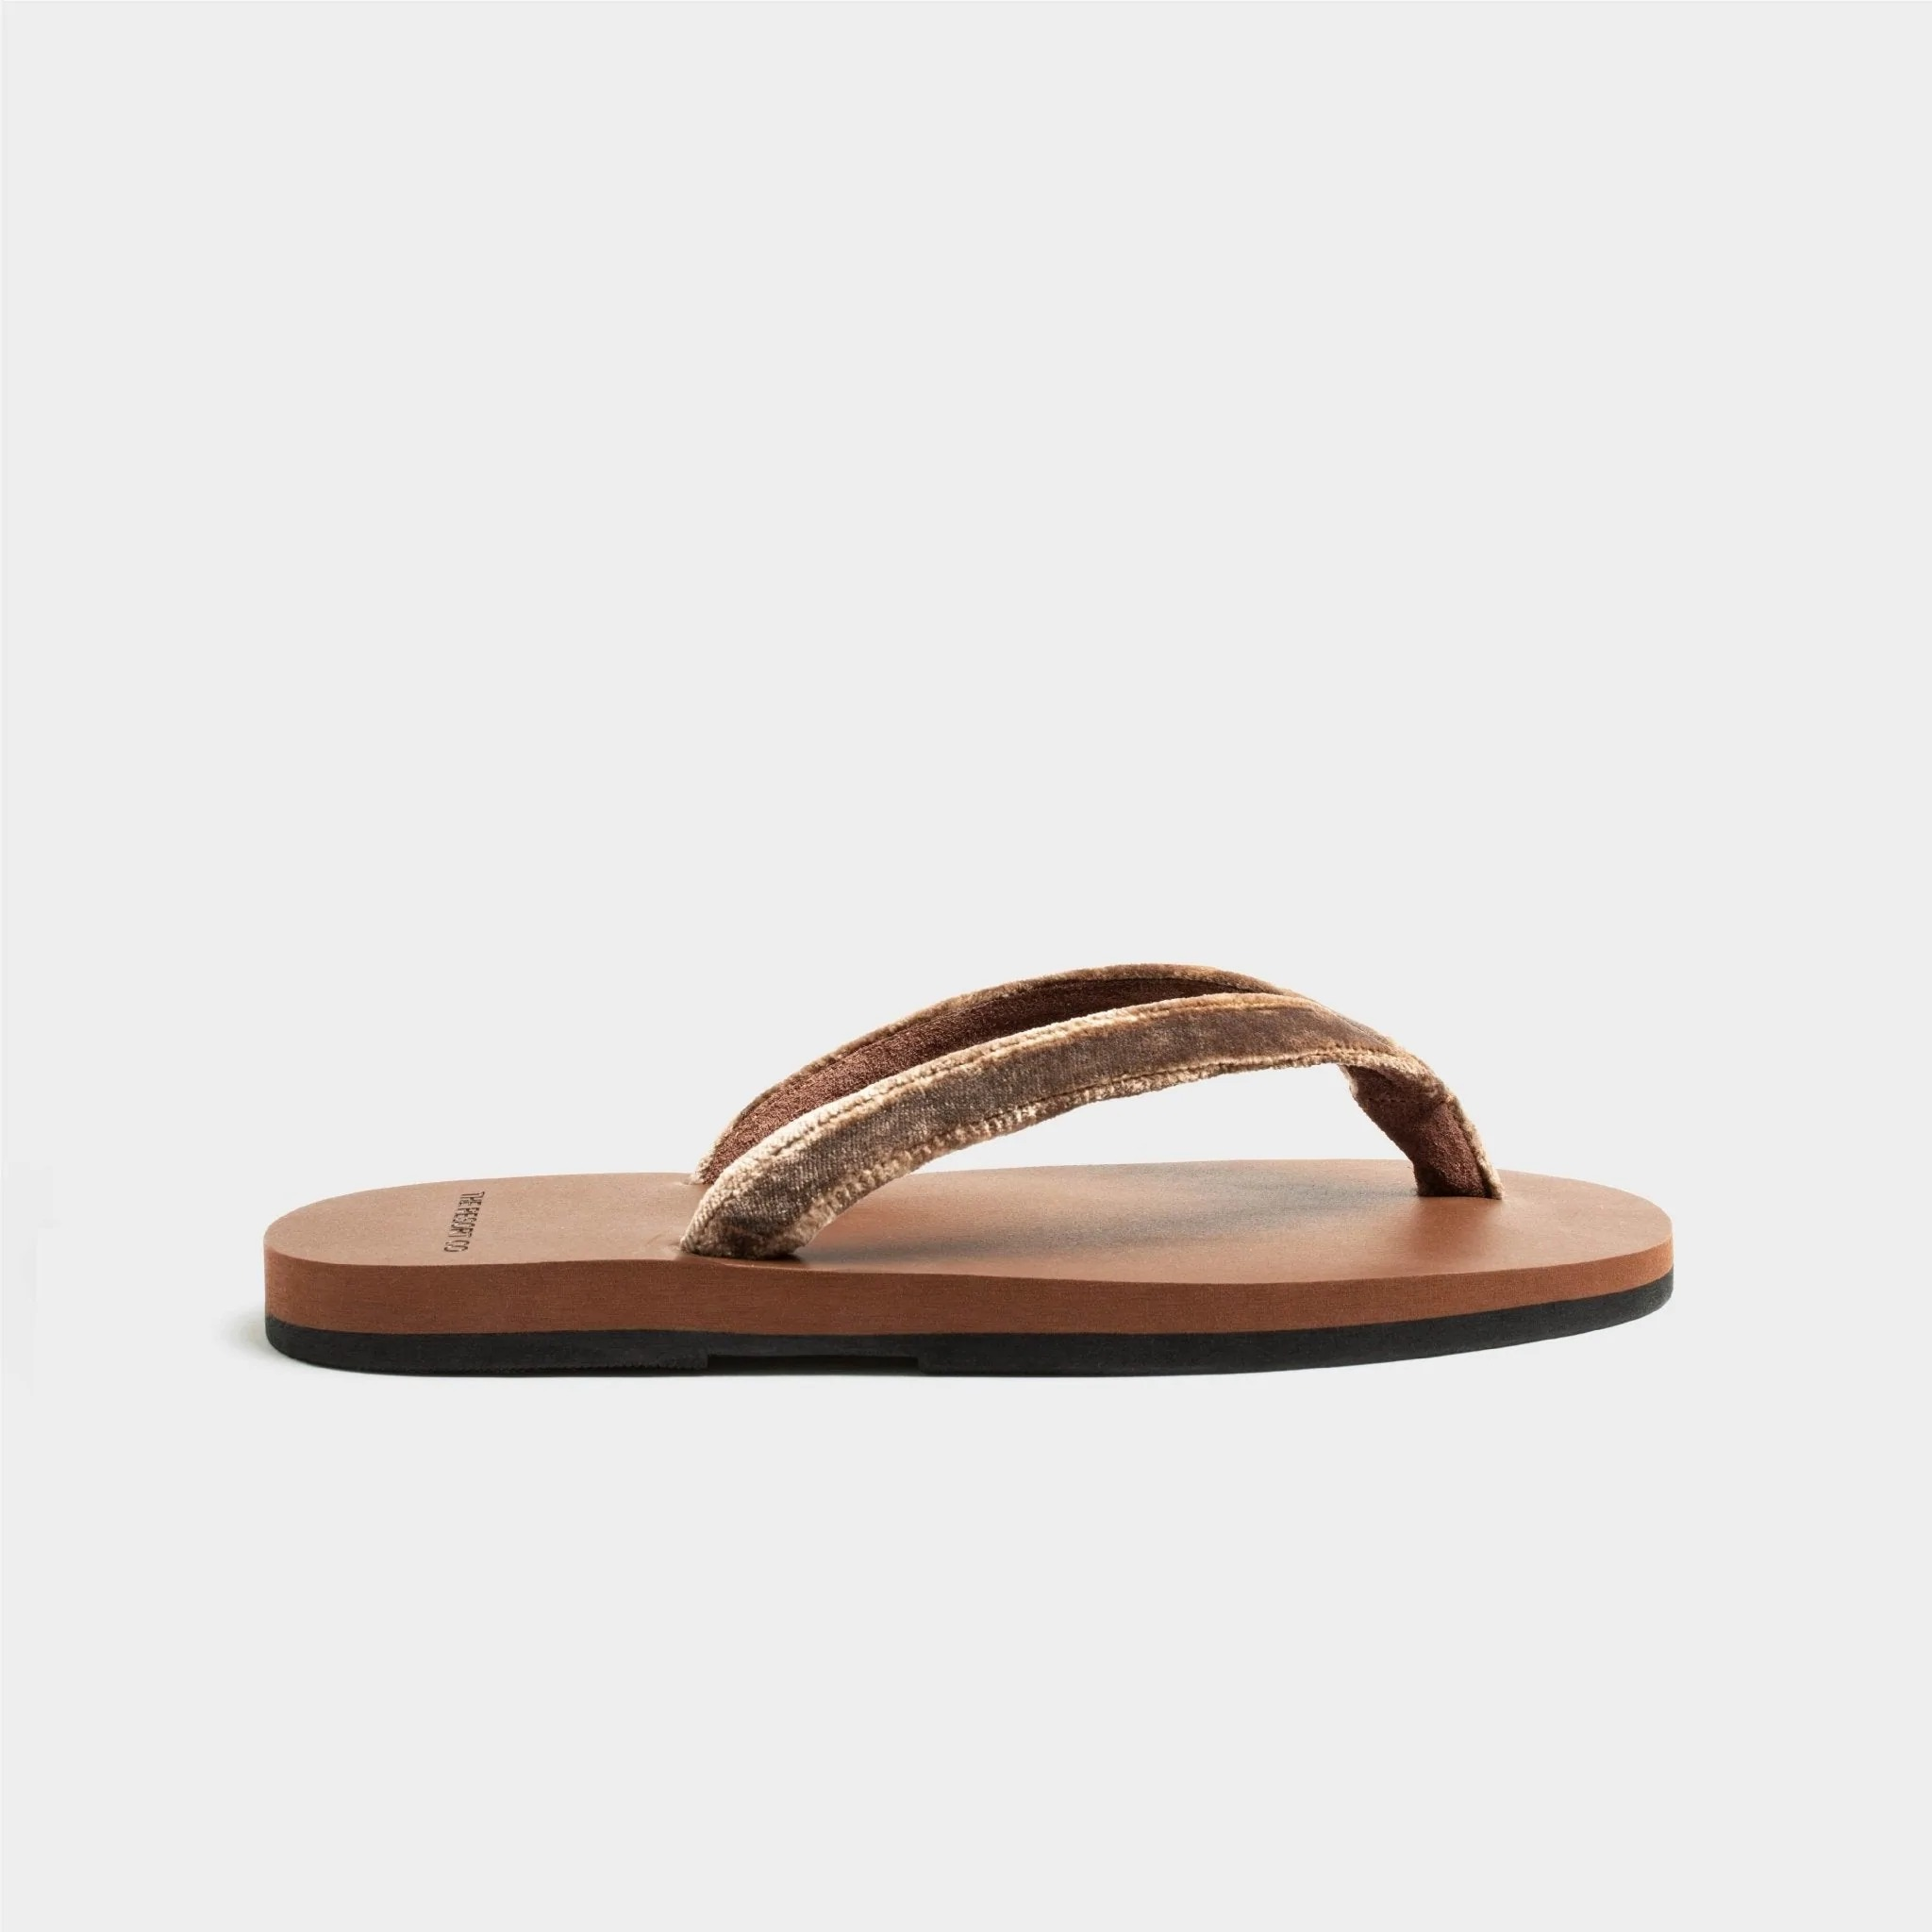 The Resort Co presents sustainable flip flops handcrafted by artisans in Italy